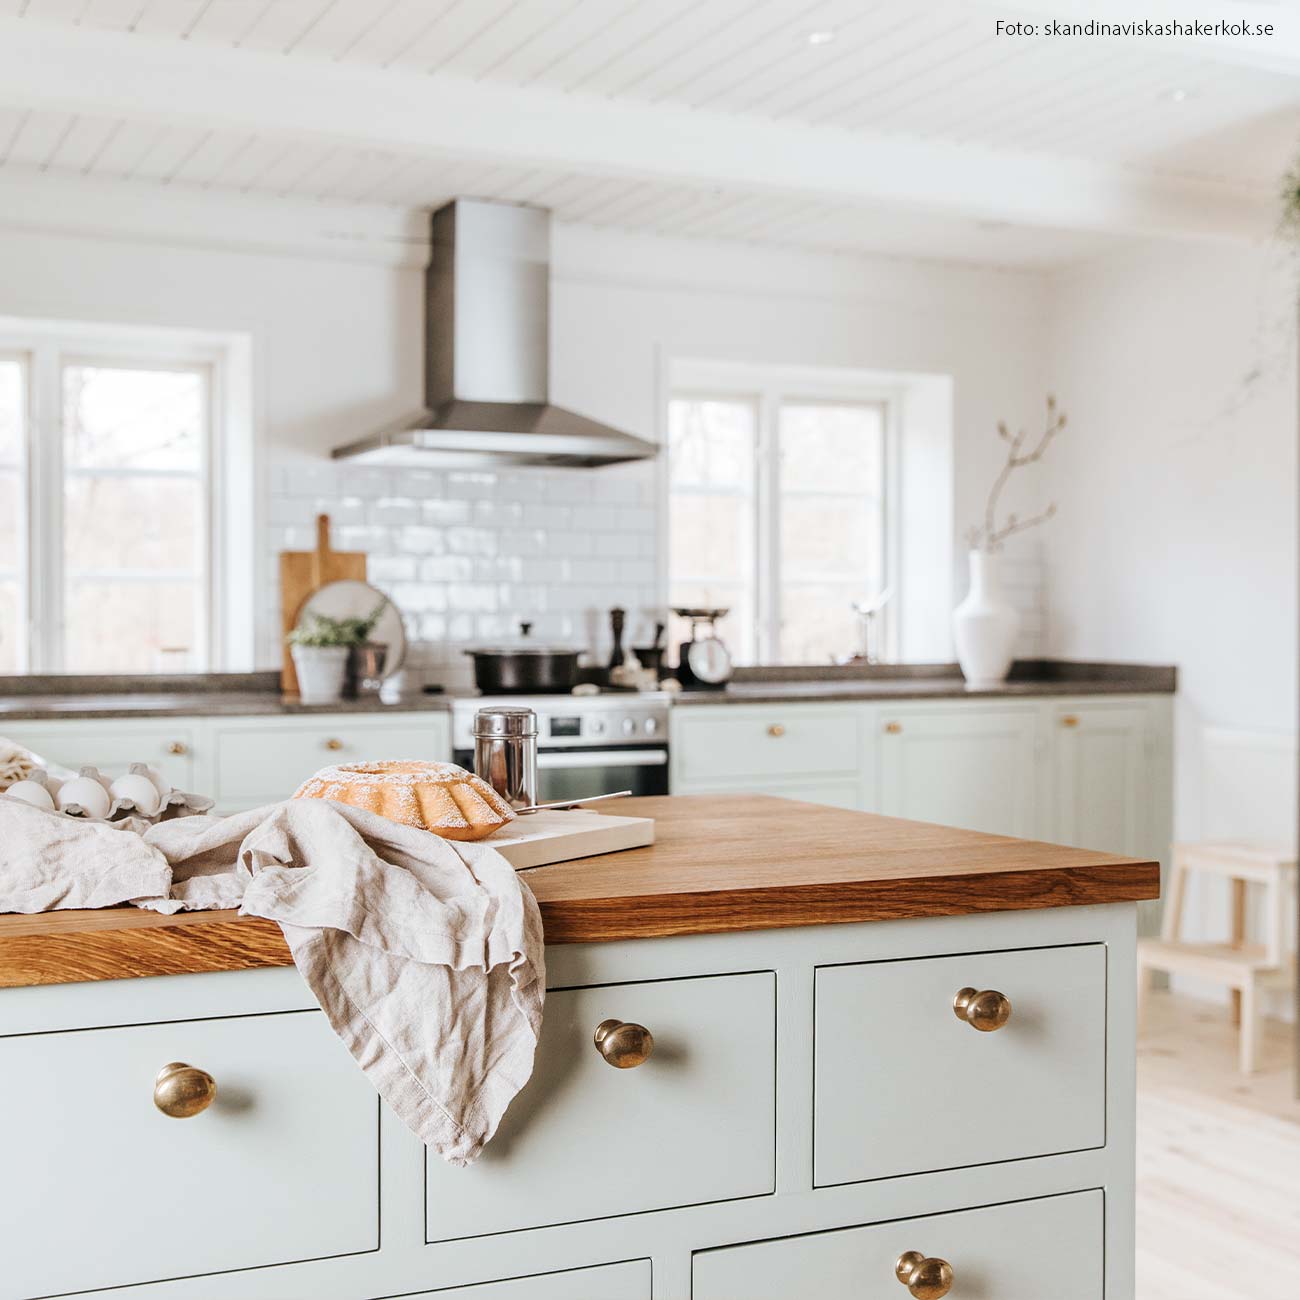 Details that set the style in a retro kitchen